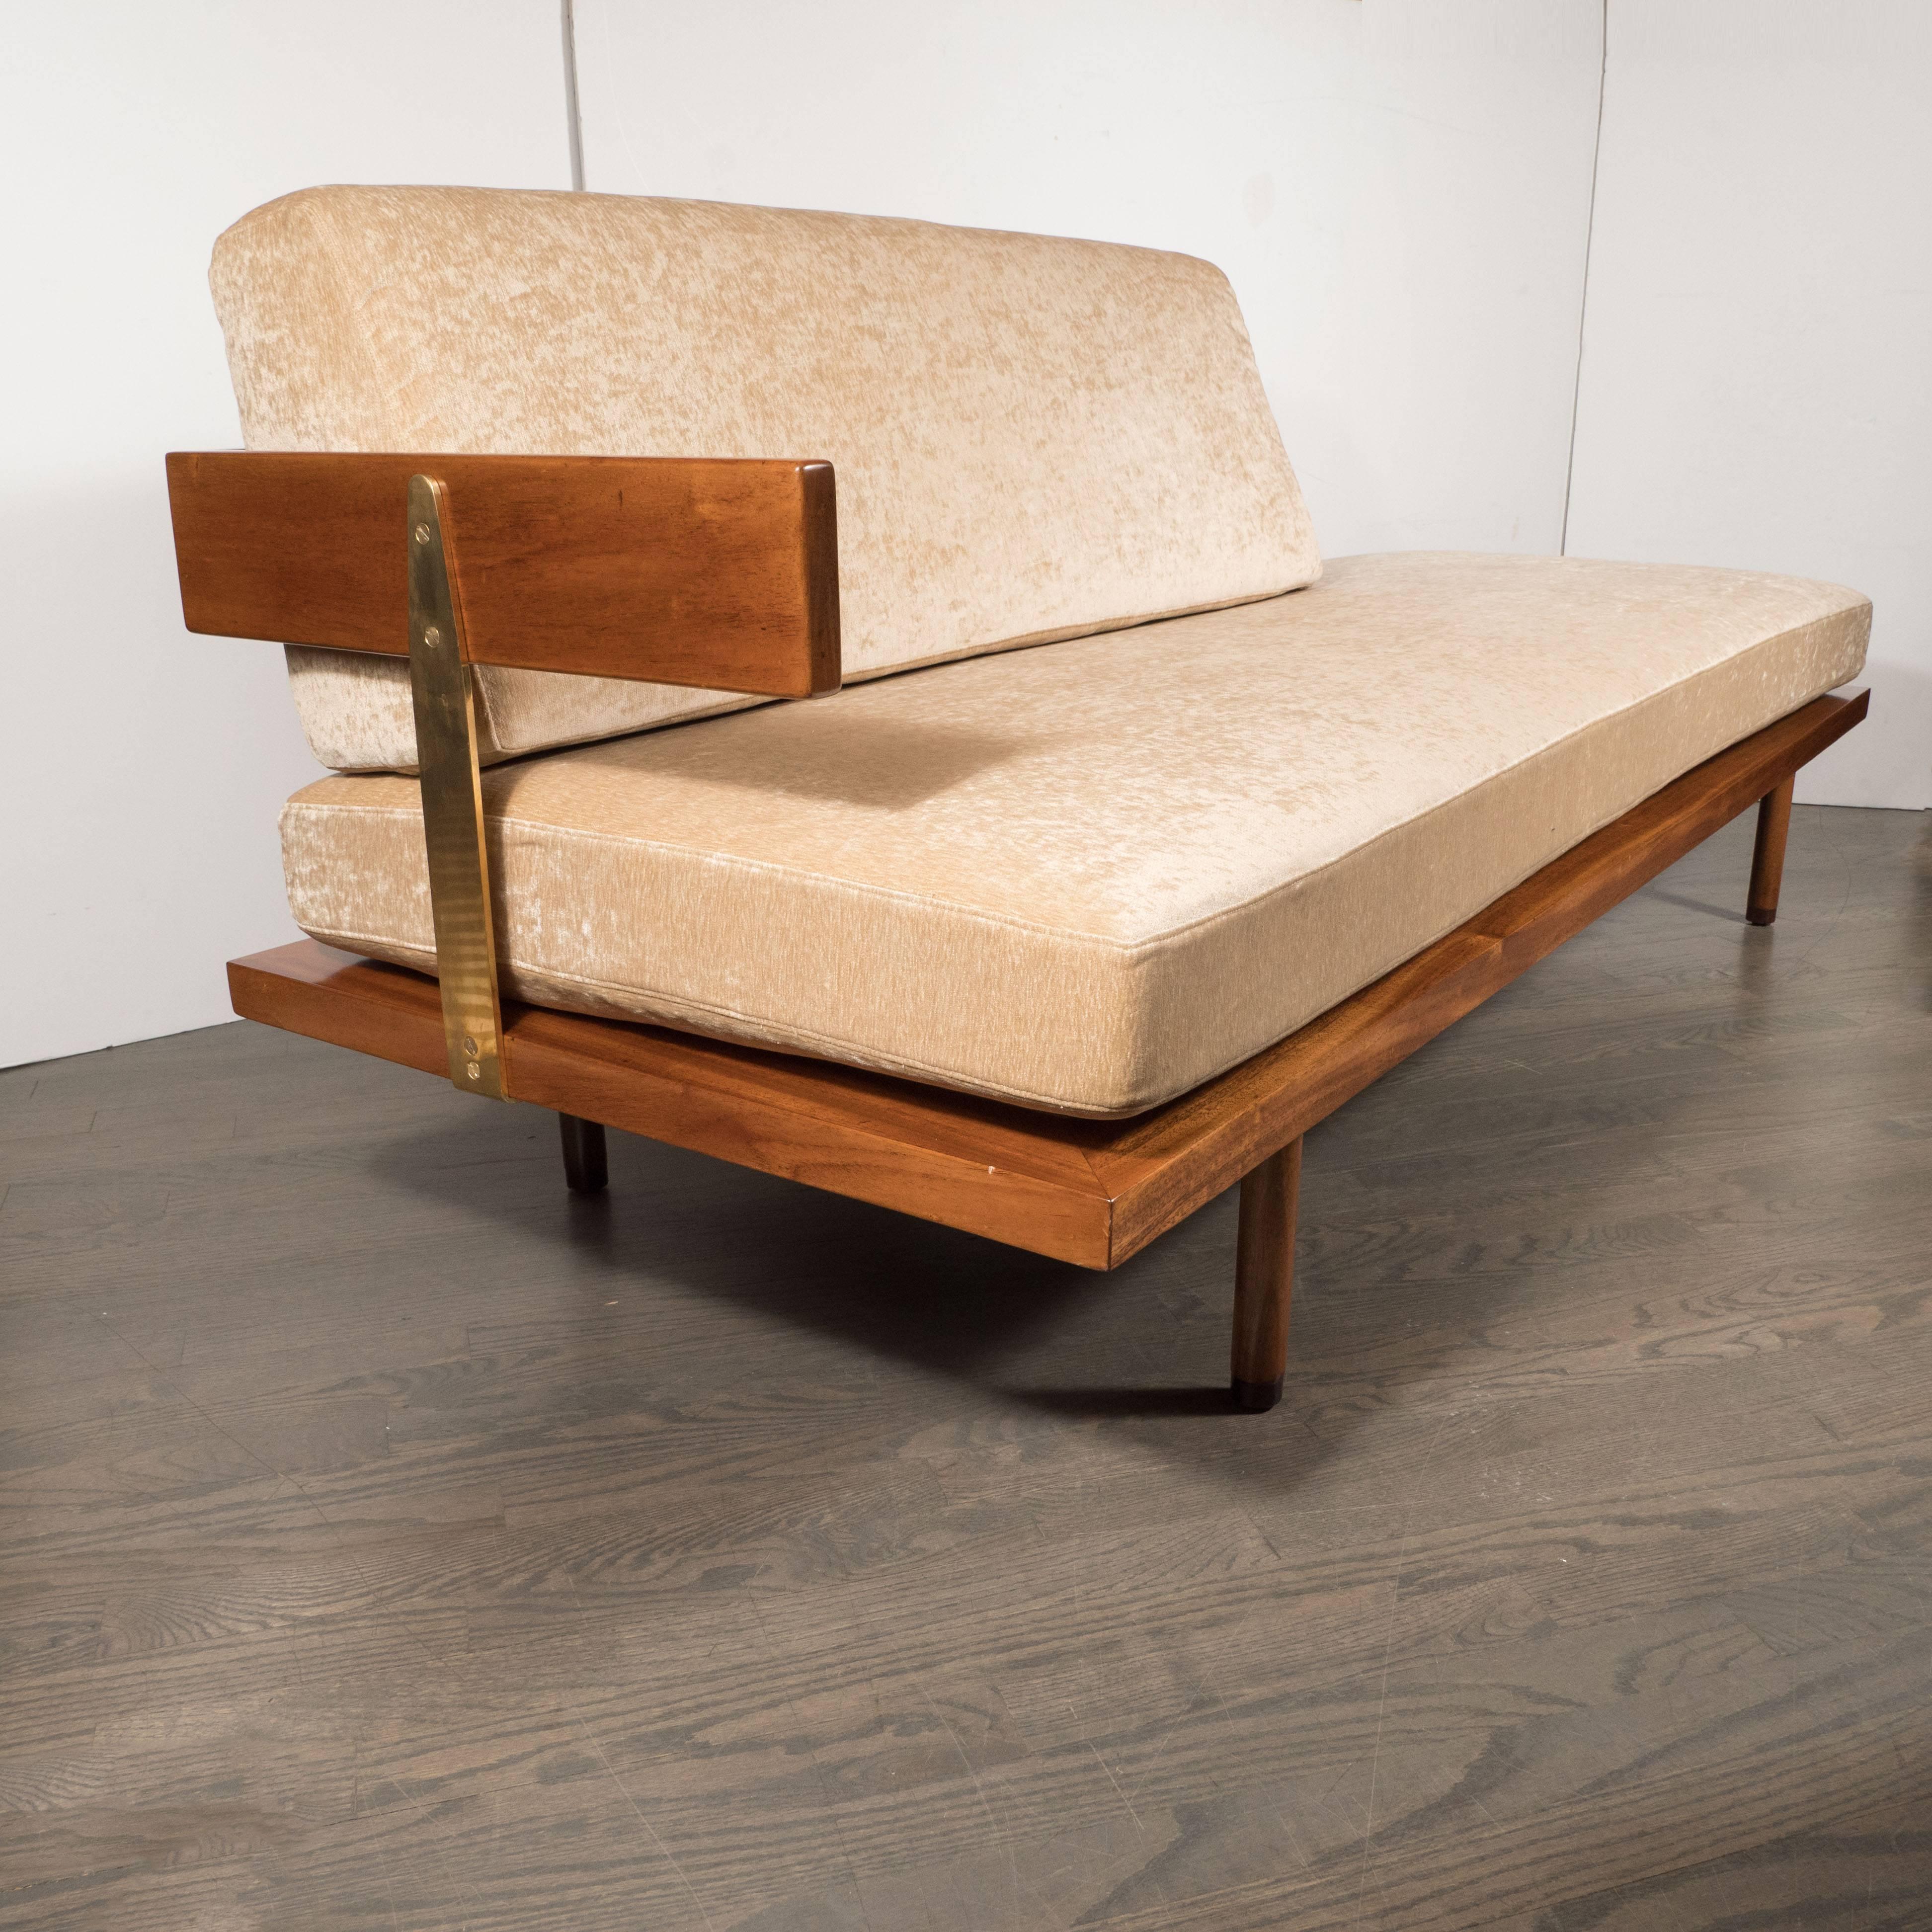 This sophisticated and chic daybed/chaise exemplifies American Mid-Century design at its best. Conceived by Harvey Probber, circa 1960, this piece exemplifies the clean and austere design for which he has become a legendary figure in Mid-Century